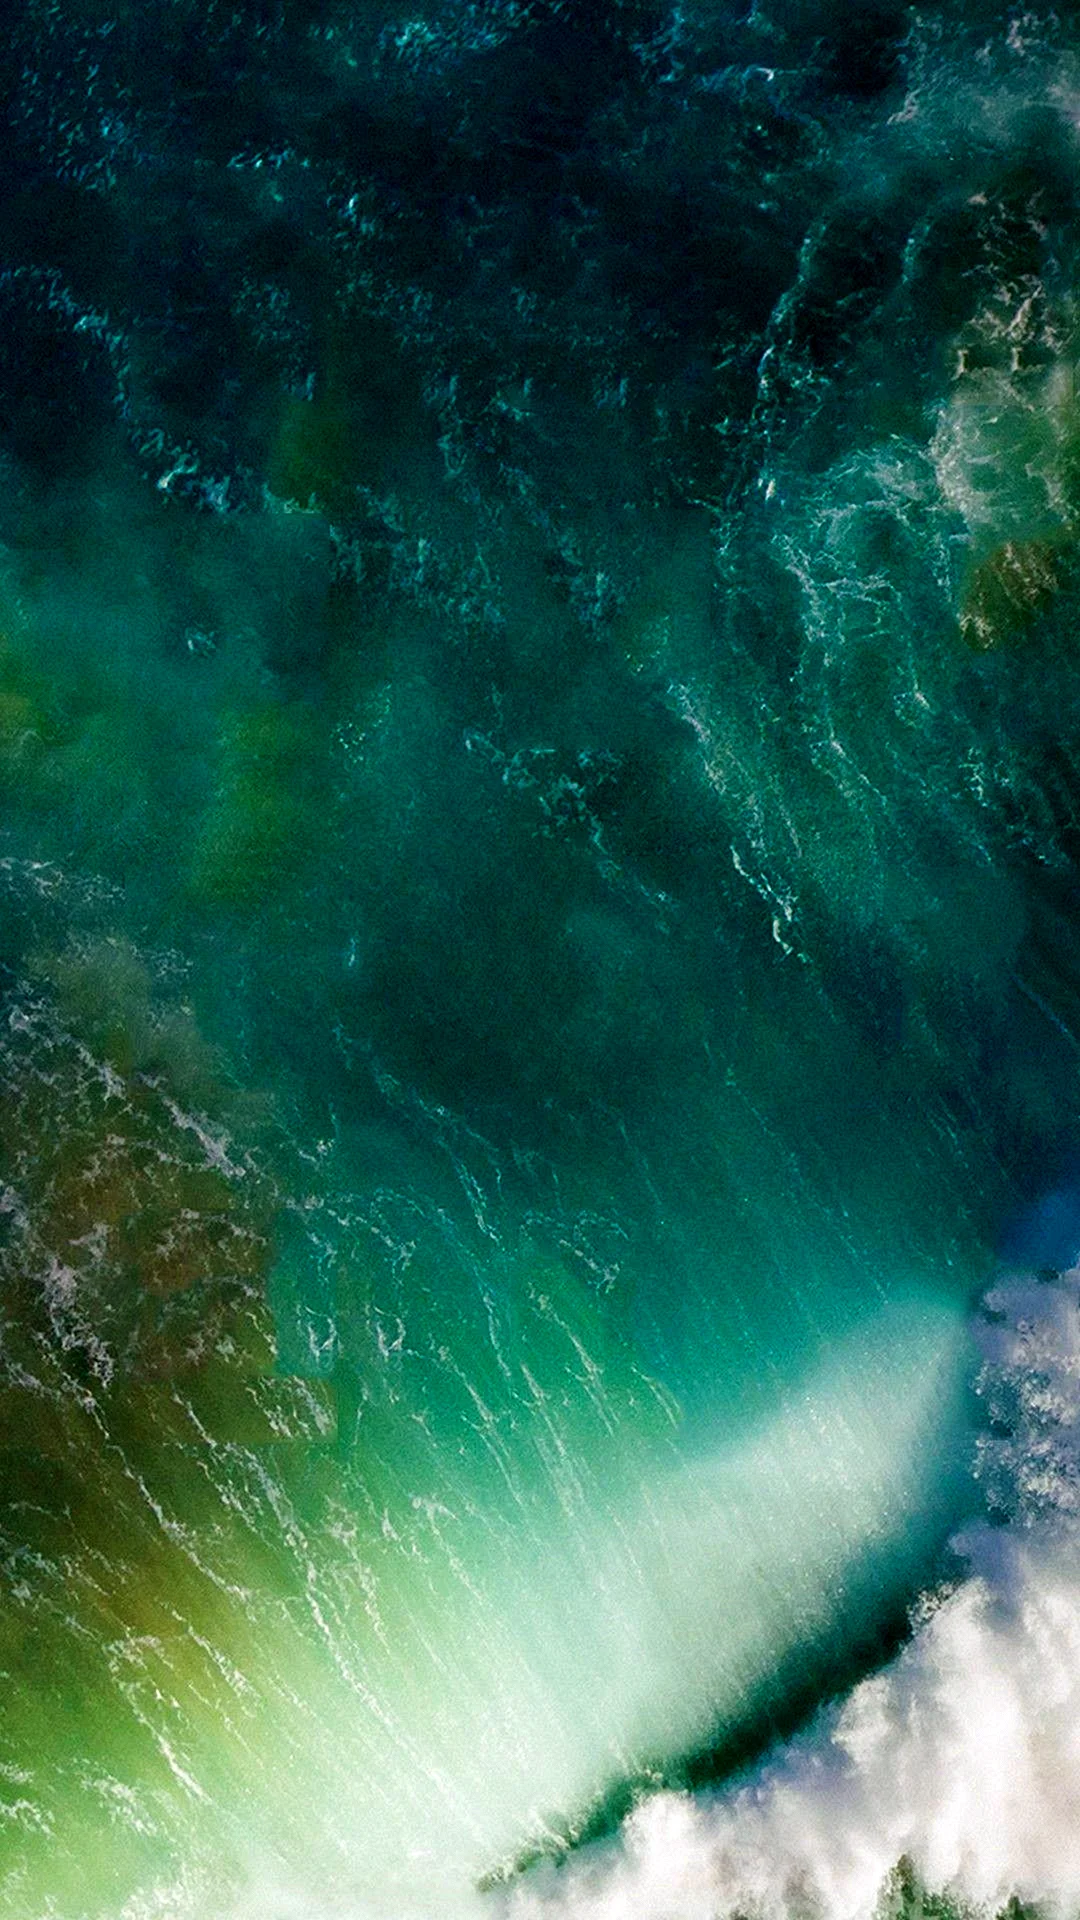 IOS 10 Wallpaper For iPhone